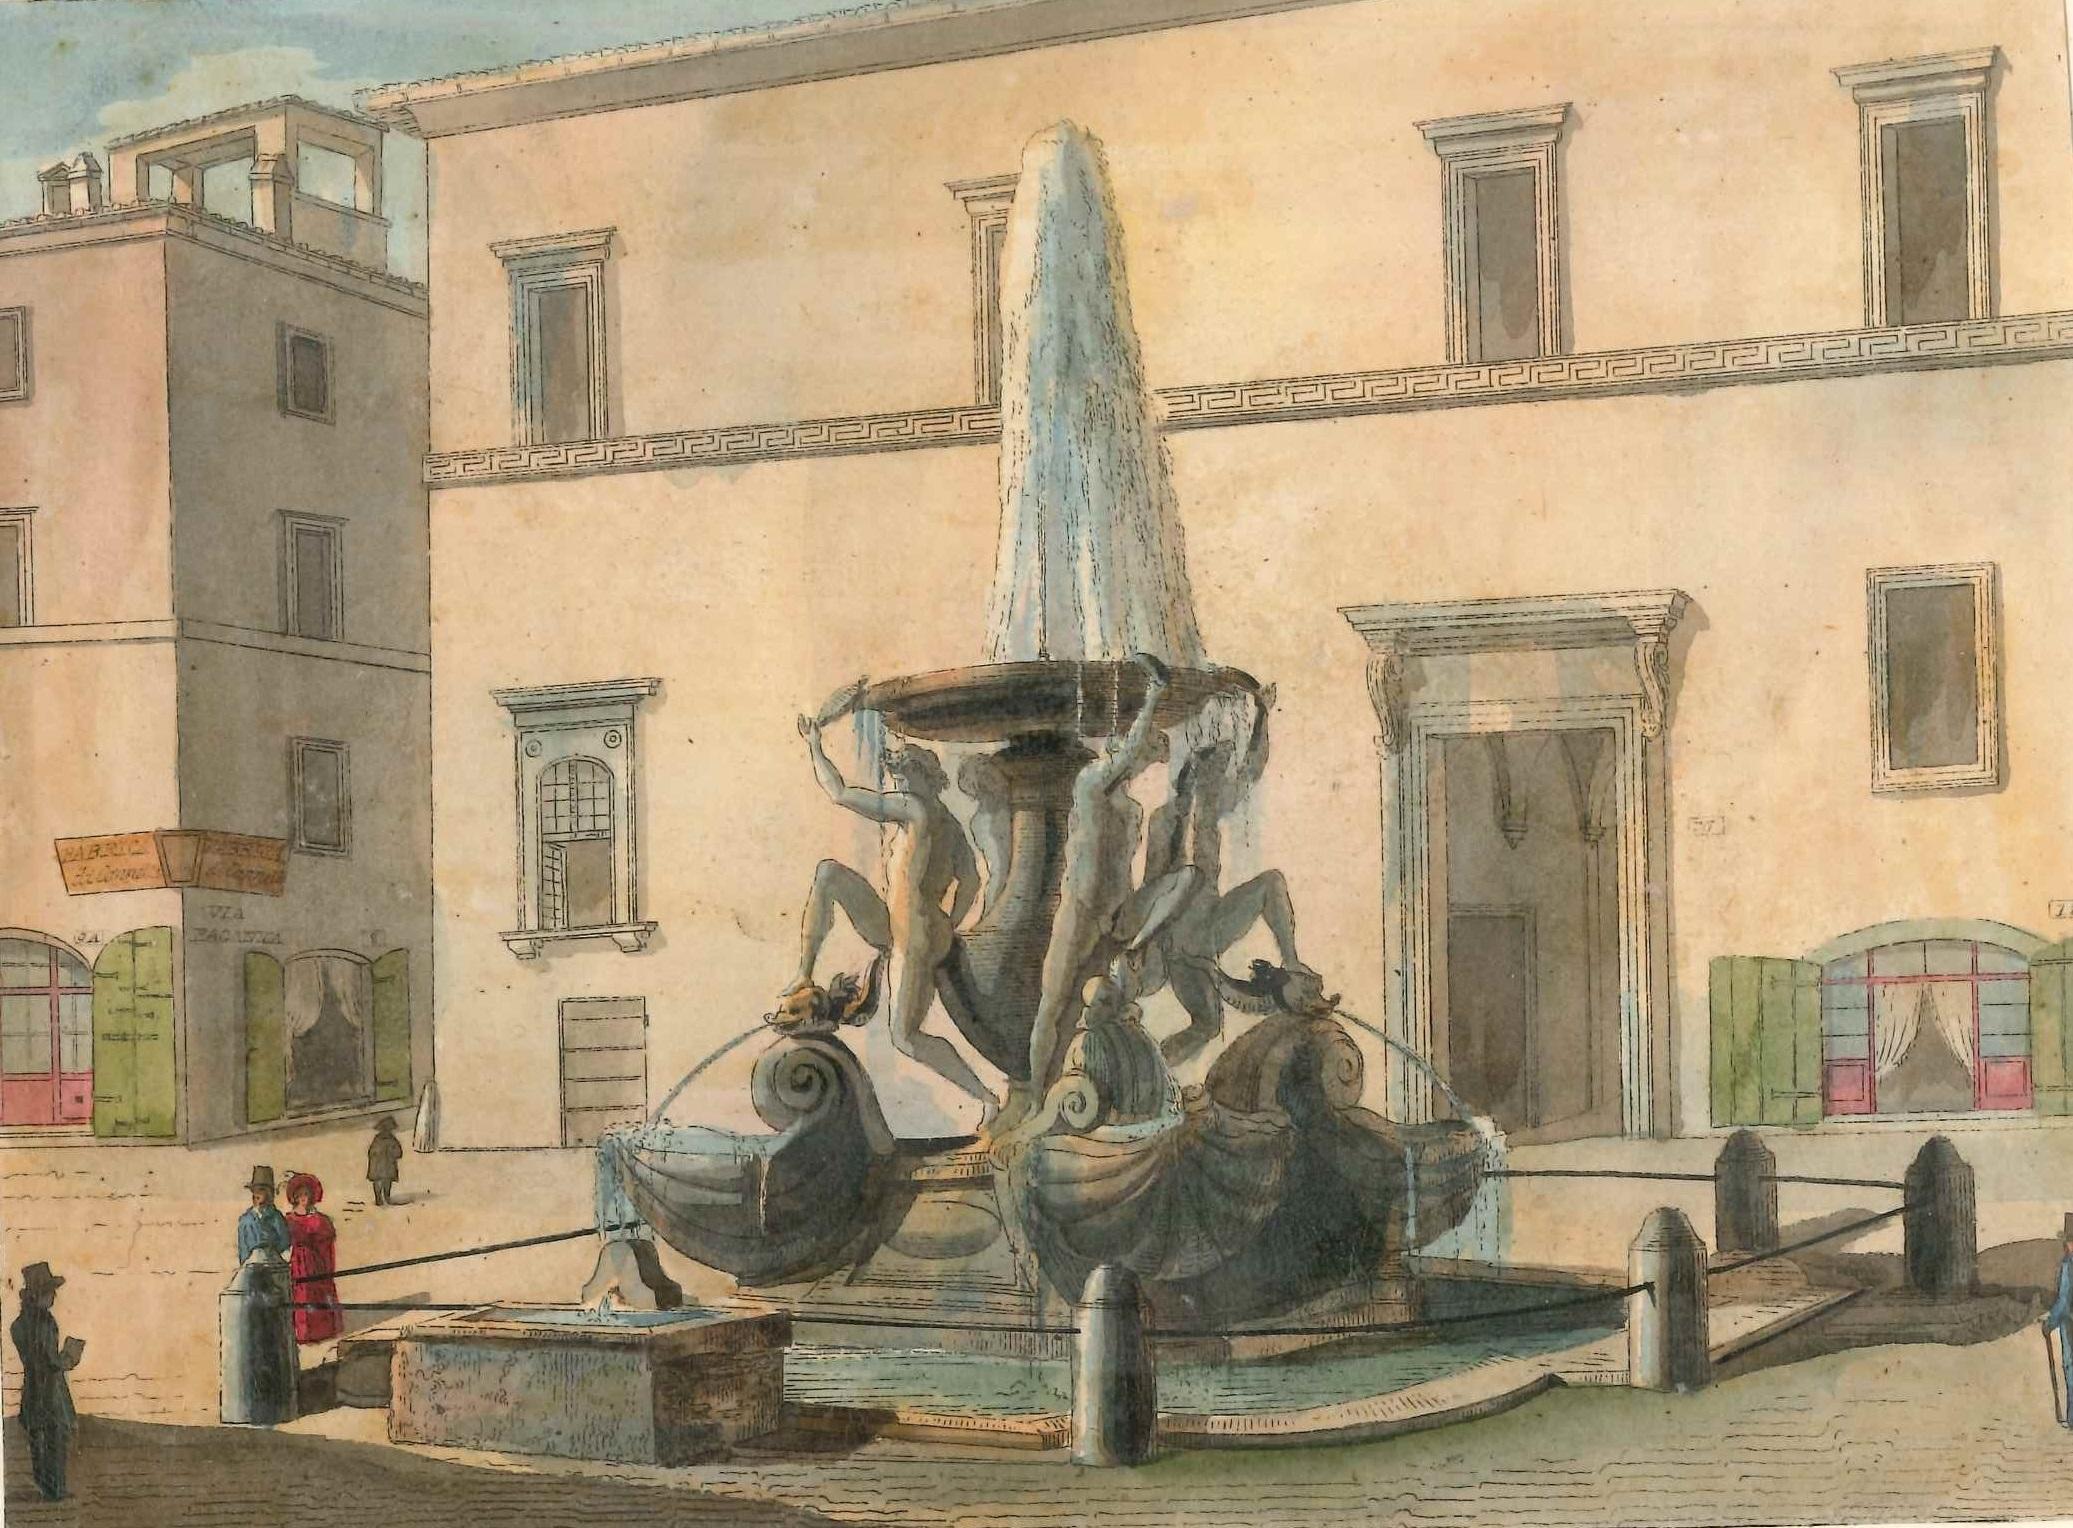 Unknown Figurative Print - Roman Fountains - Original Lithographs and Watercolors - Mid 19th Century